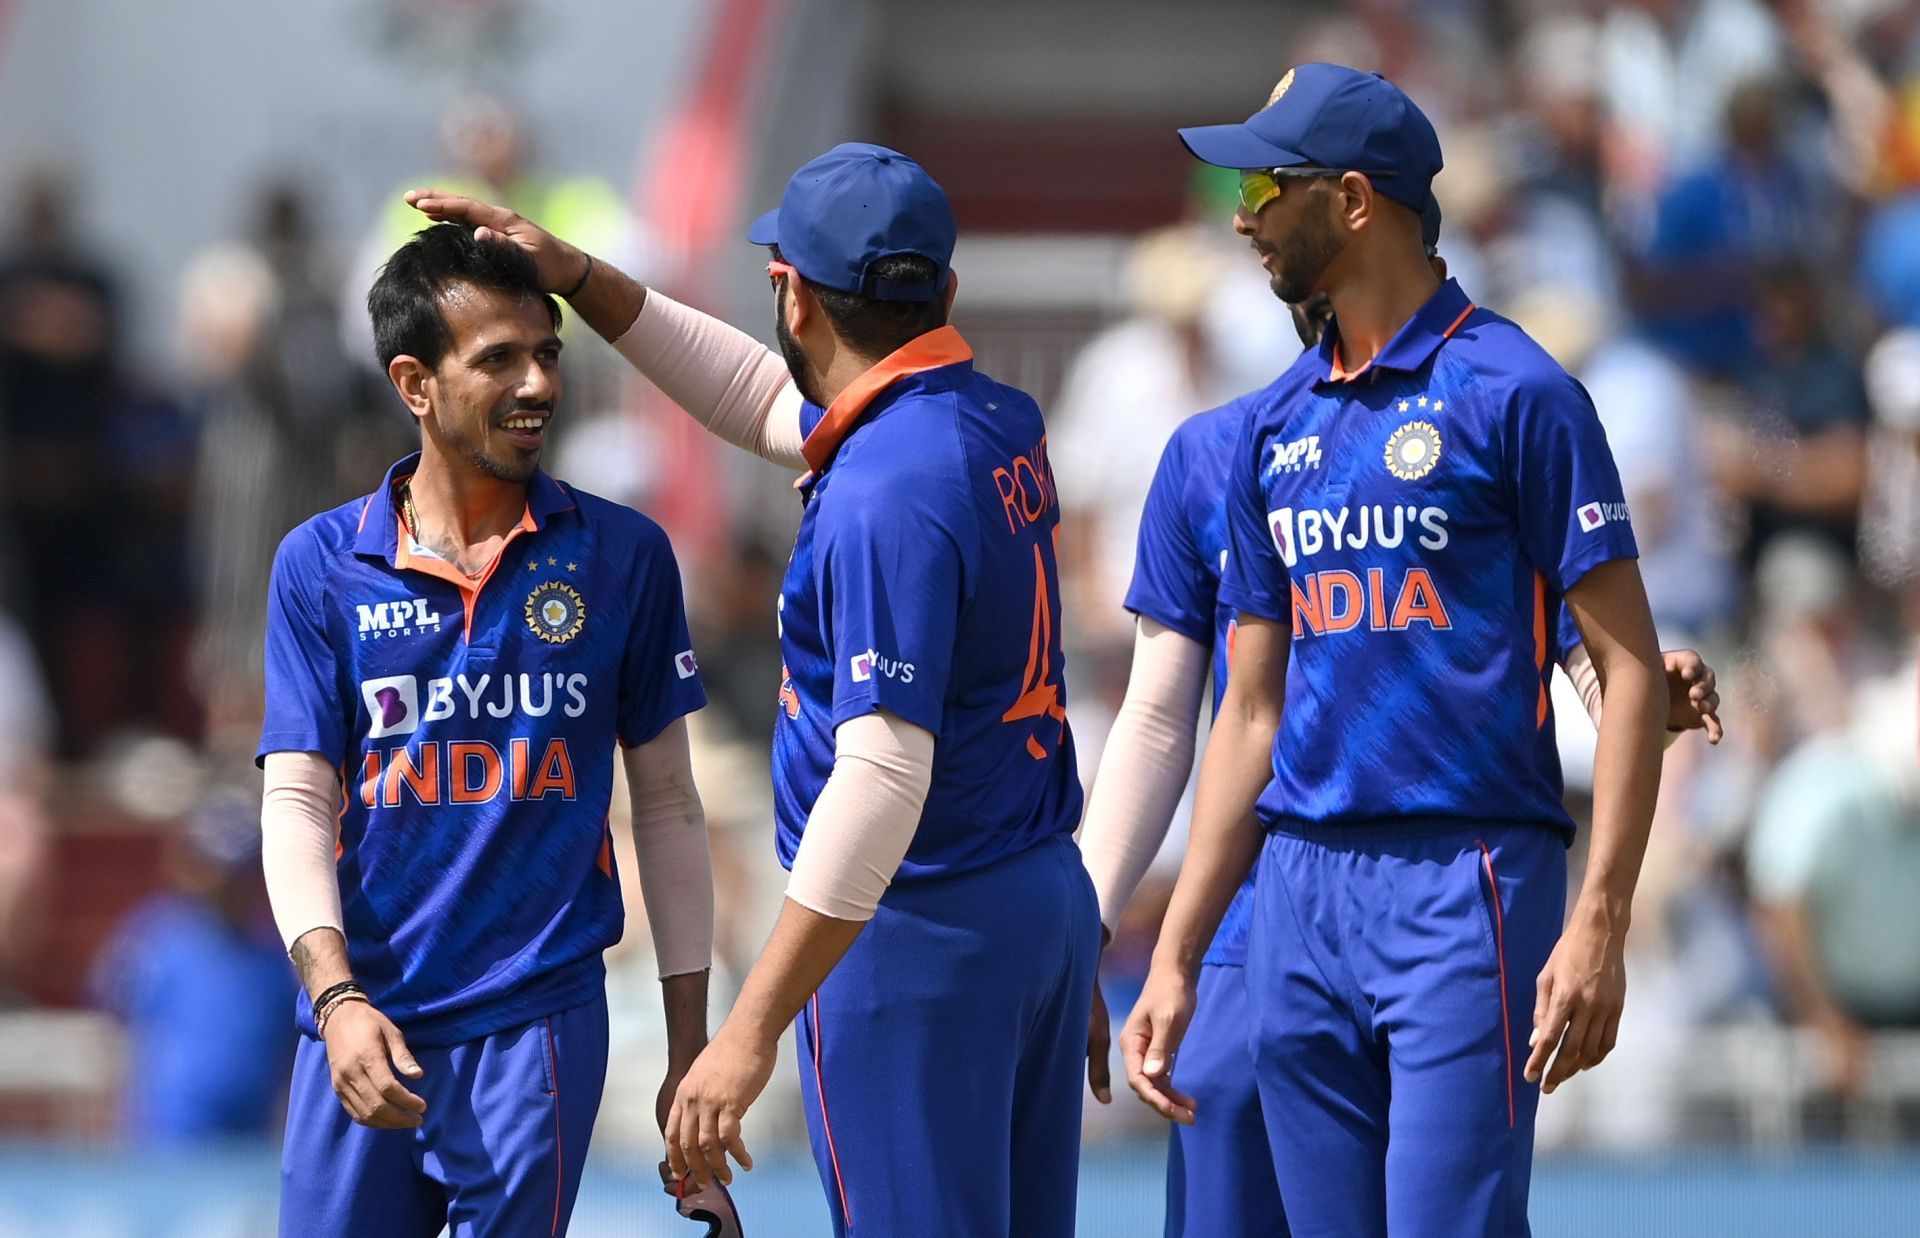 Yuzvendra Chahal (left) celebrates a wicket with teammates. Pic: Getty Images